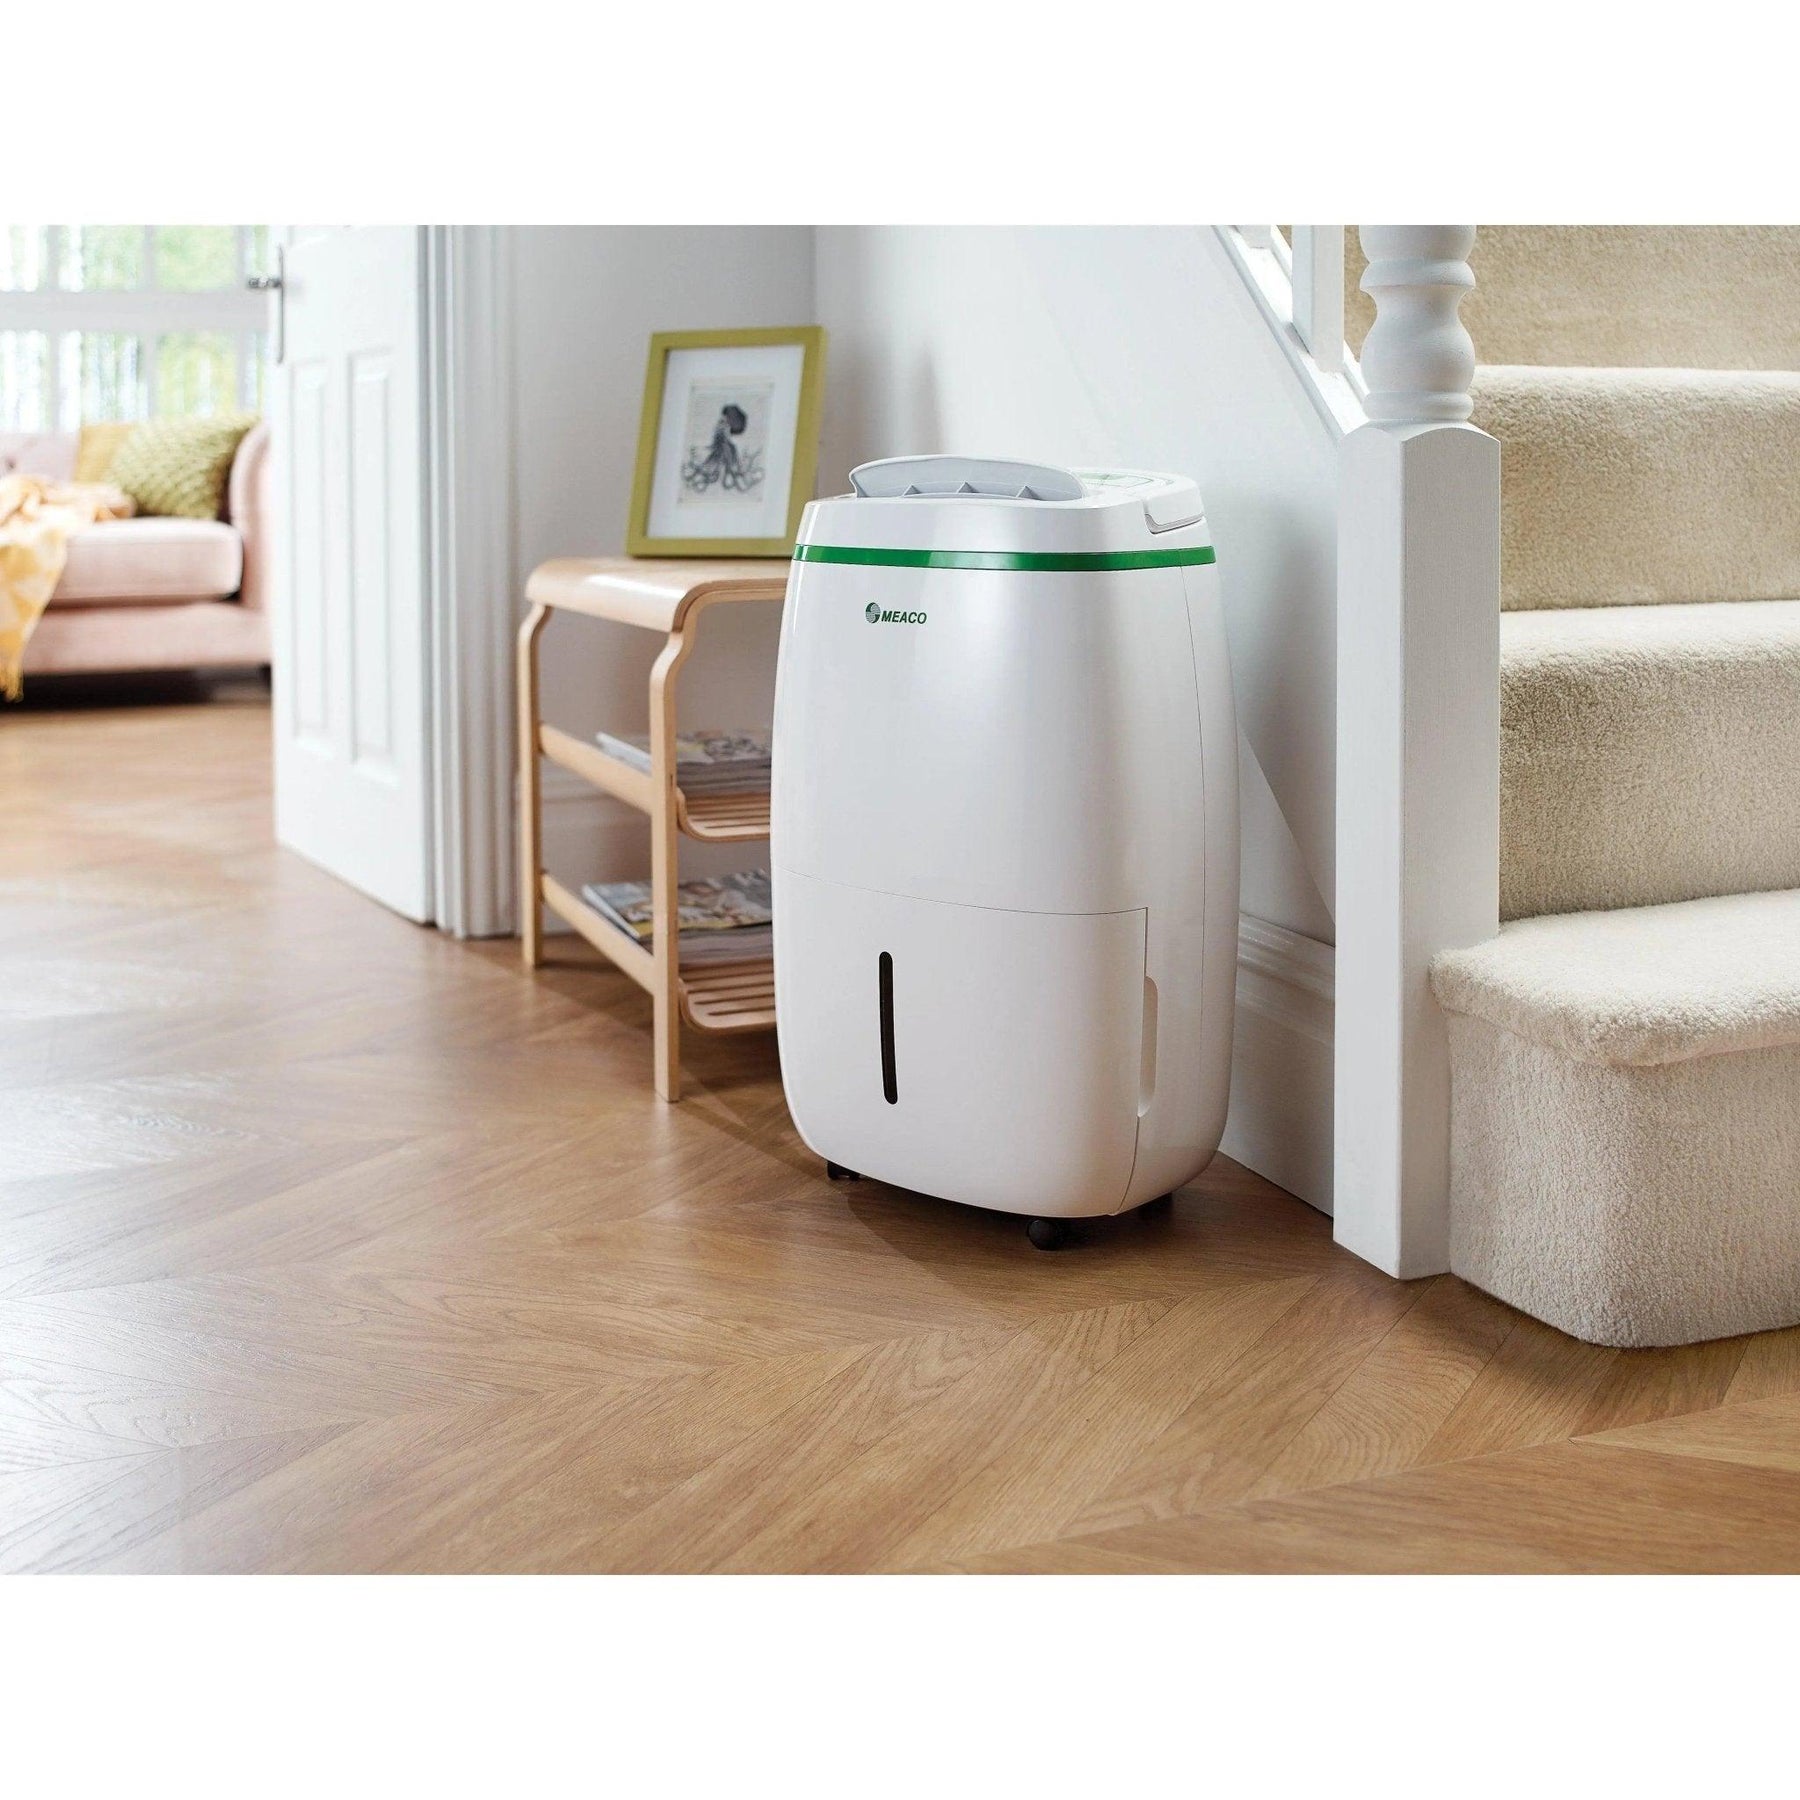 Meaco 20L Low Energy Economical Dehumidifier Review by Fixmyroof - Solenco South Africa